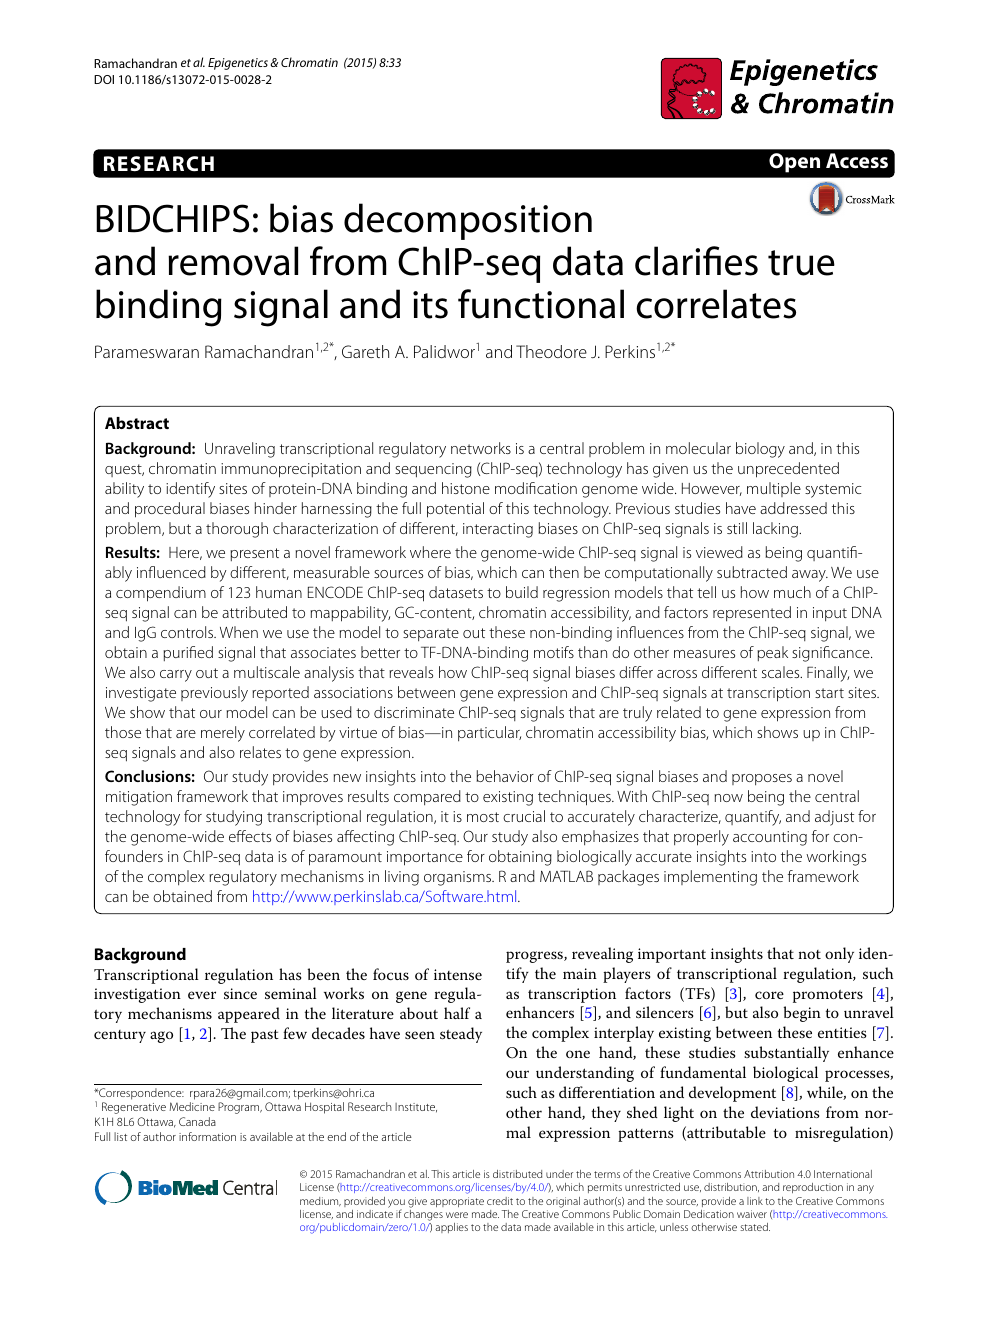 Bidchips Bias Decomposition And Removal From Chip Seq Data Clarifies True Binding Signal And Its Functional Correlates Topic Of Research Paper In Biological Sciences Download Scholarly Article Pdf And Read For Free